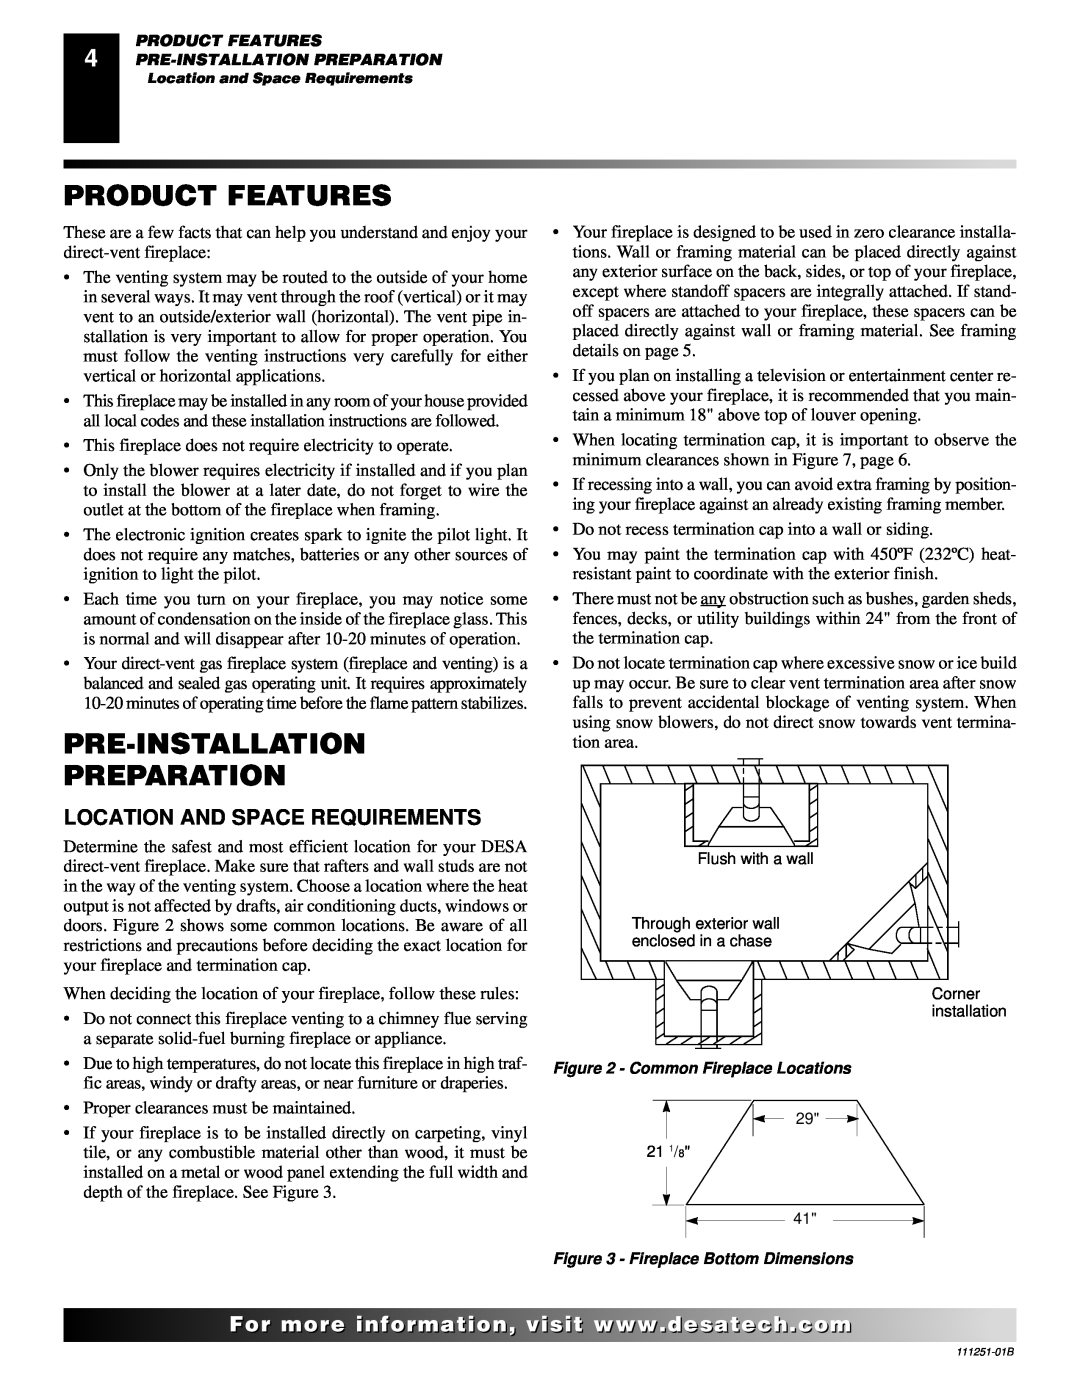 Desa (V)T36ENA installation manual Product Features, Pre-Installation Preparation, Location And Space Requirements 